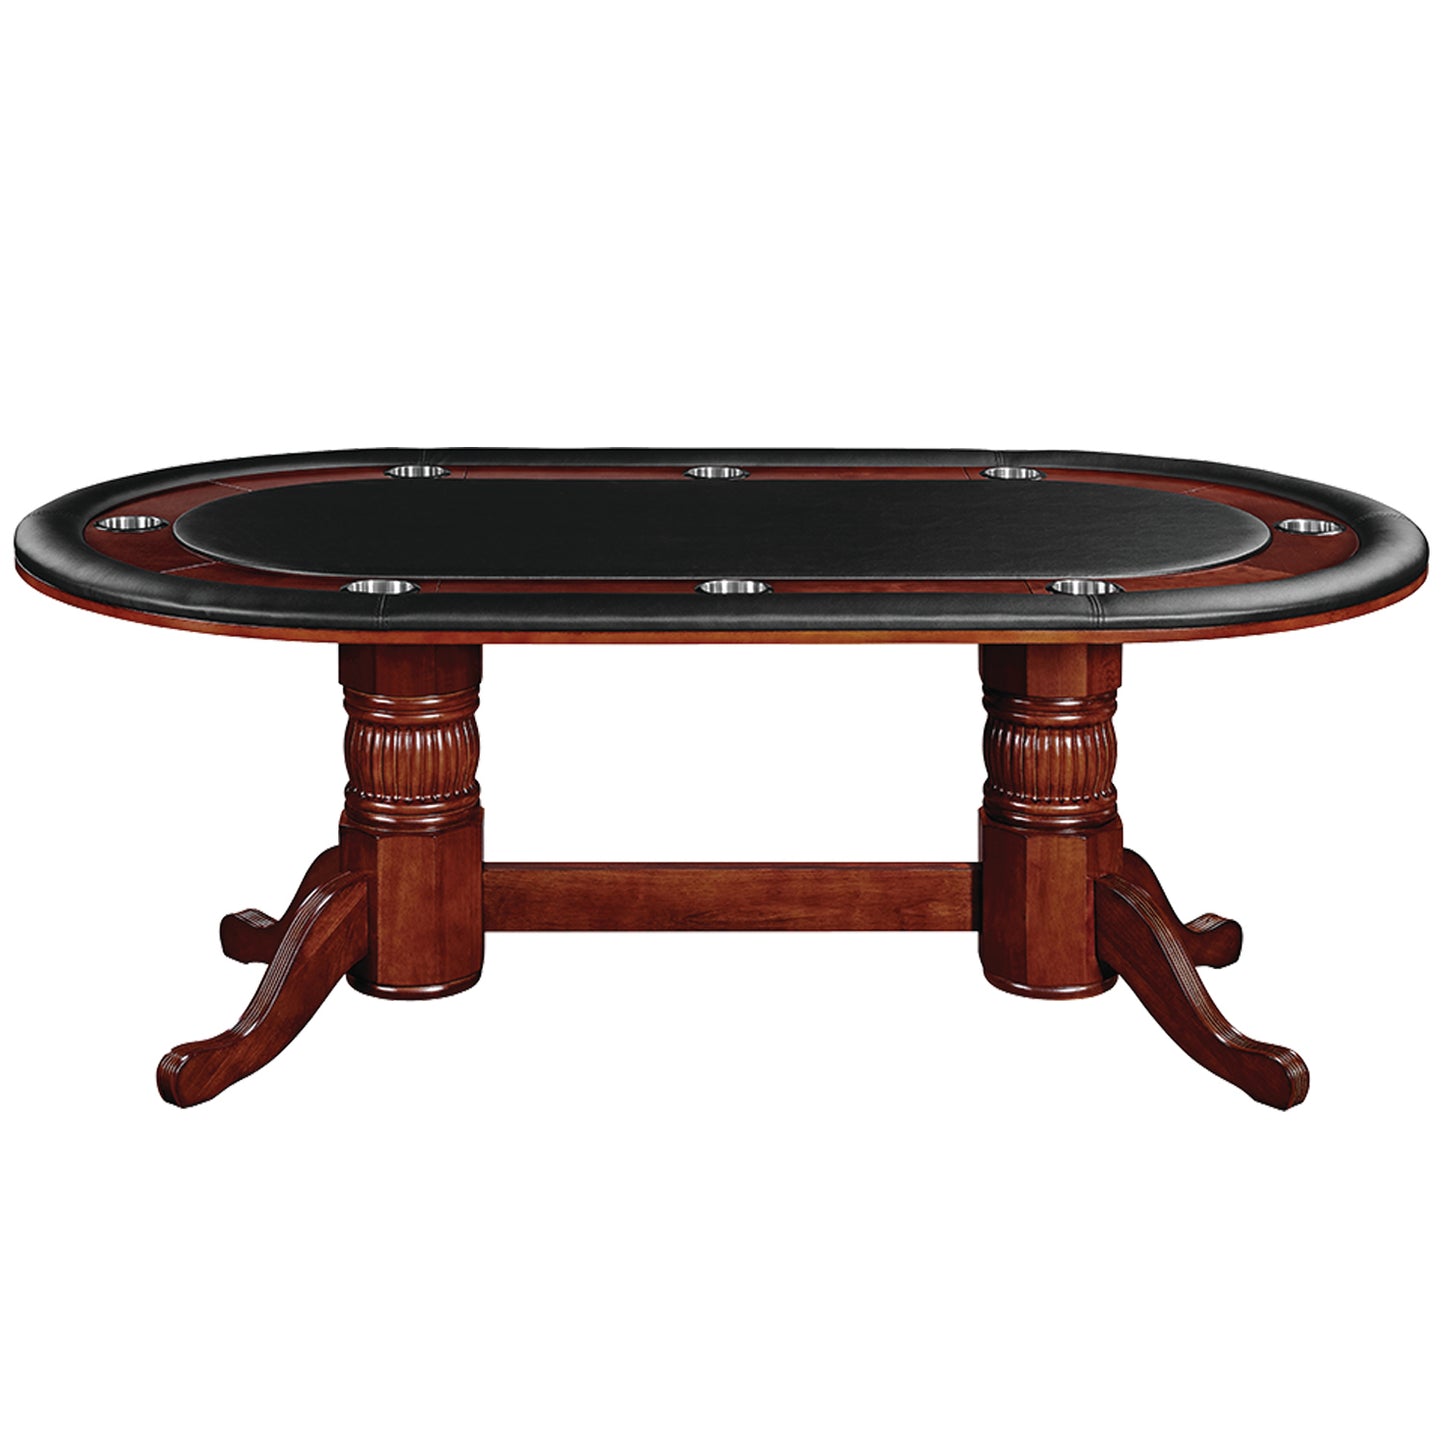 84 inch solid wood poker table with padded black vinyl game top in an English tudor finish.